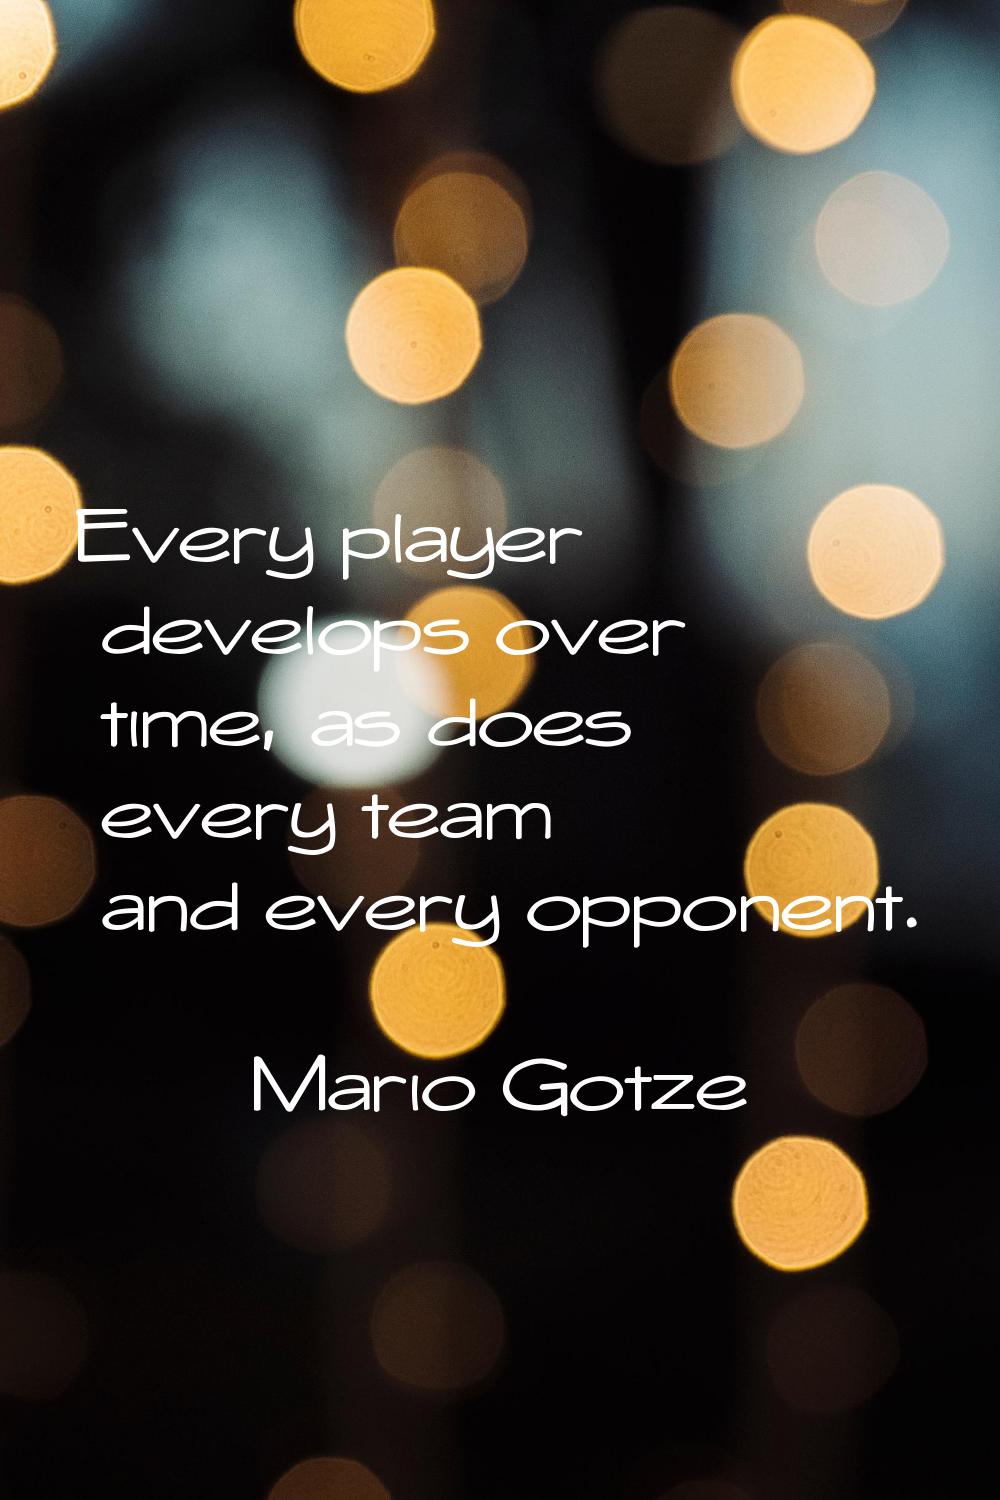 Every player develops over time, as does every team and every opponent.